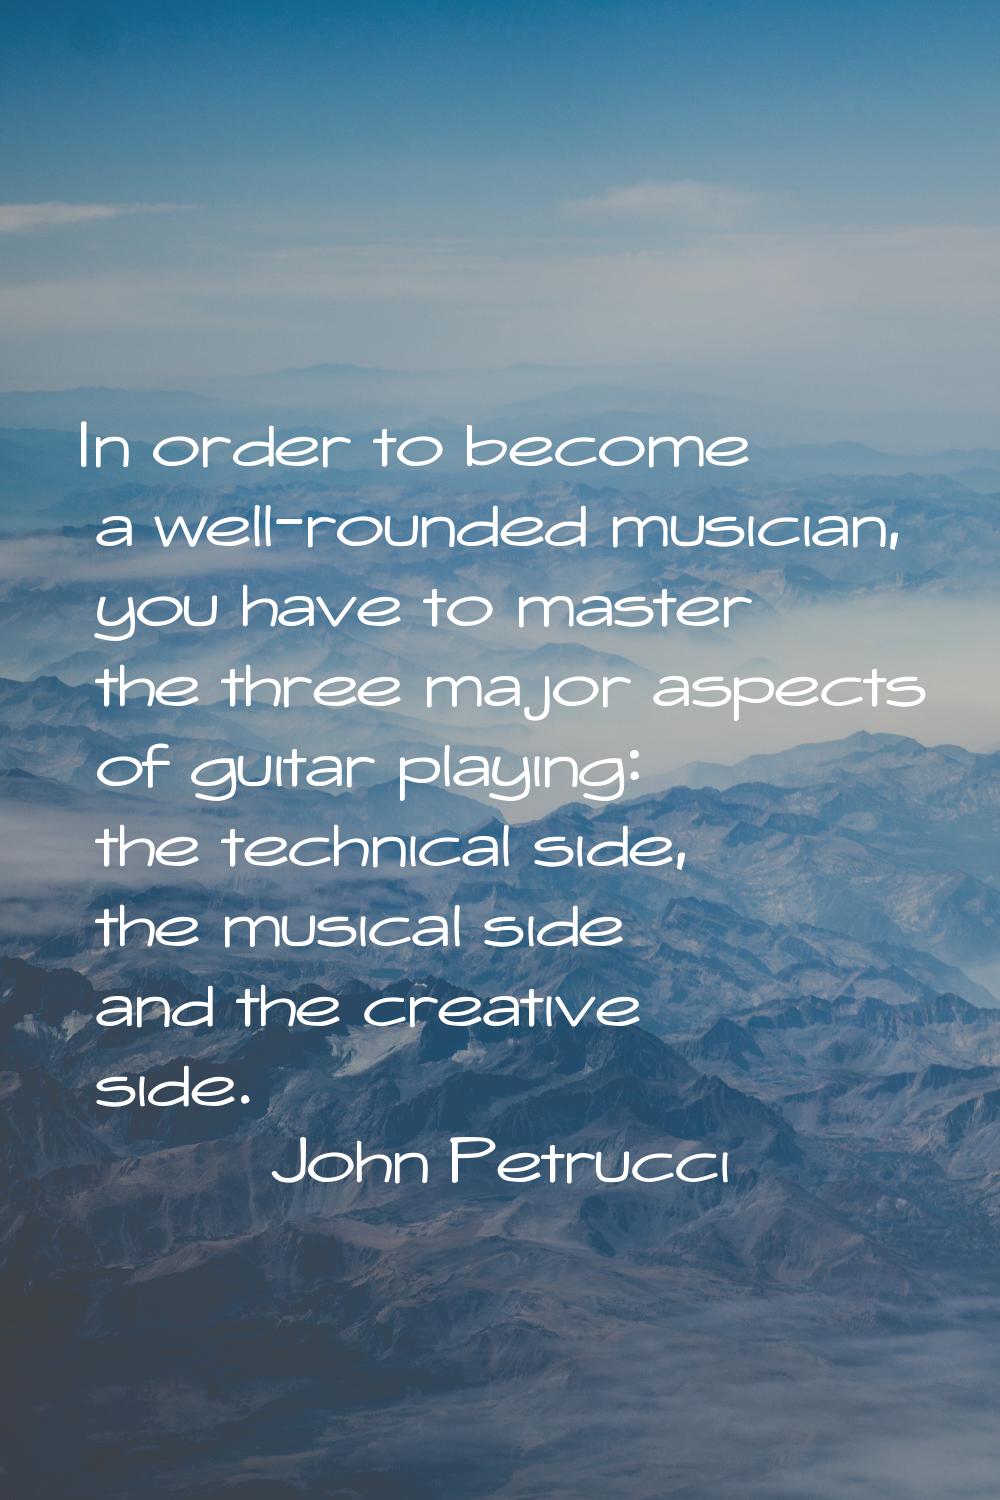 In order to become a well-rounded musician, you have to master the three major aspects of guitar pl